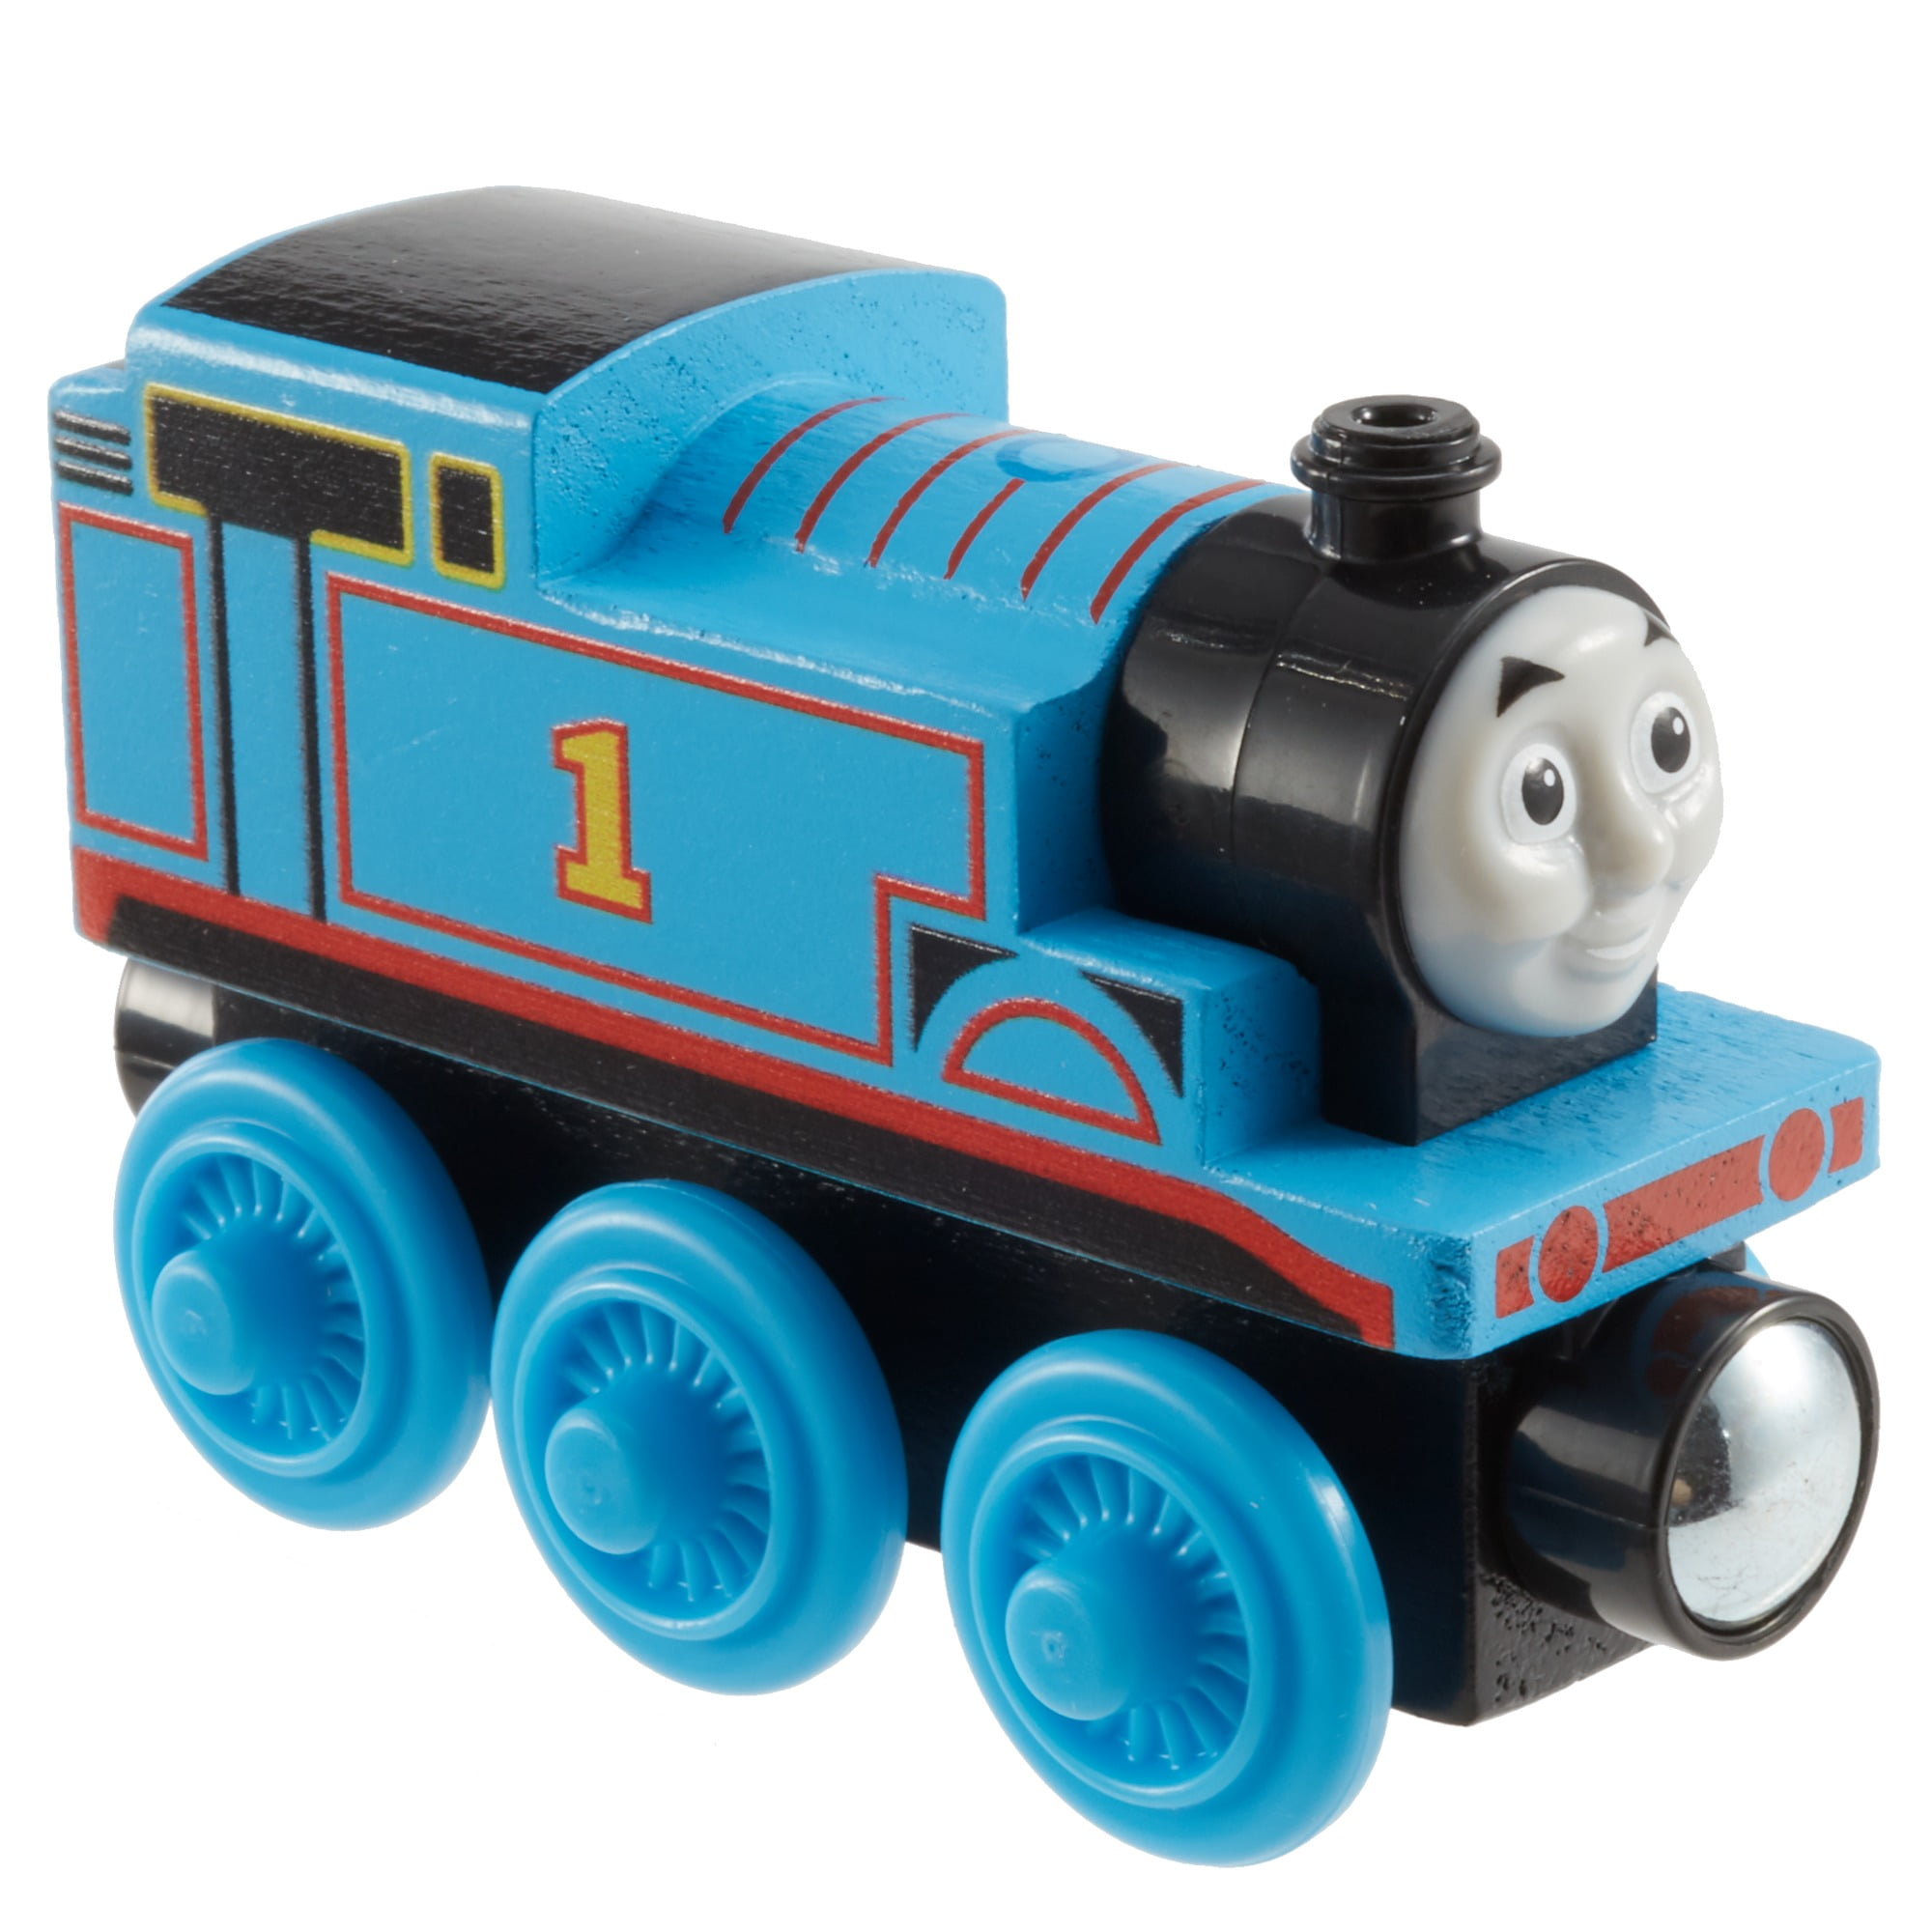 Thomas and friends wooden railway geox kids